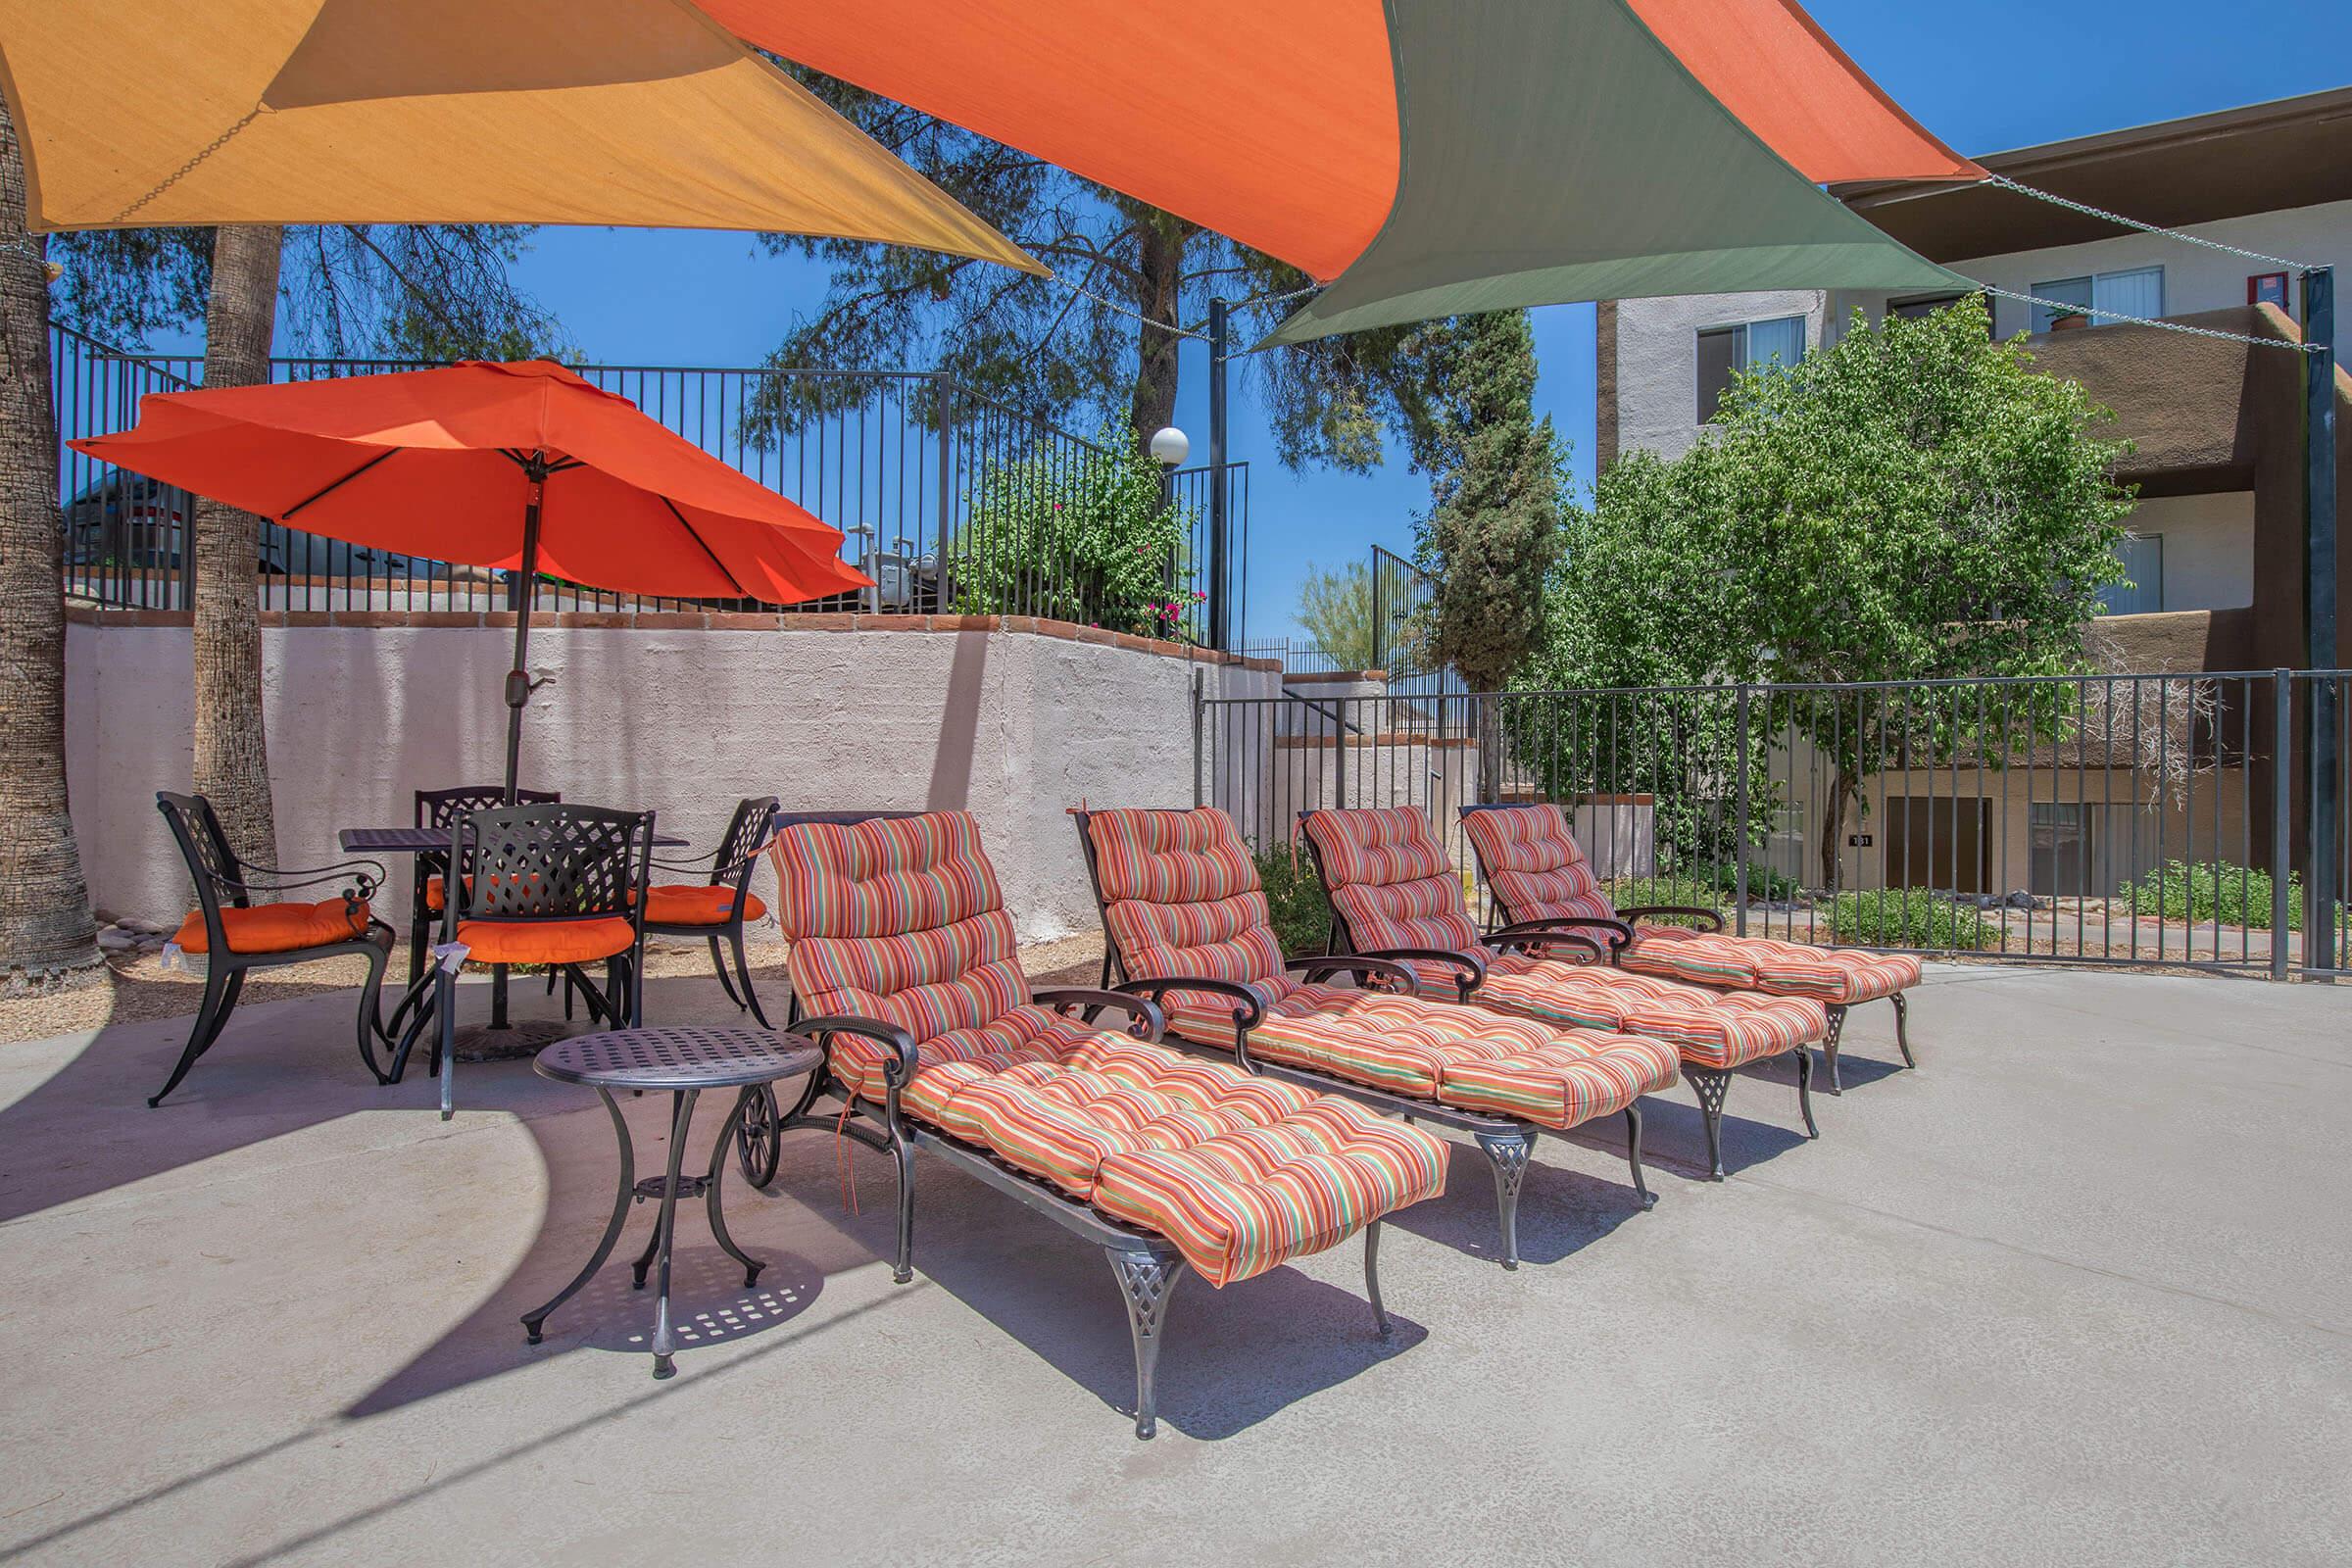 a group of lawn chairs sitting on top of an orange umbrella